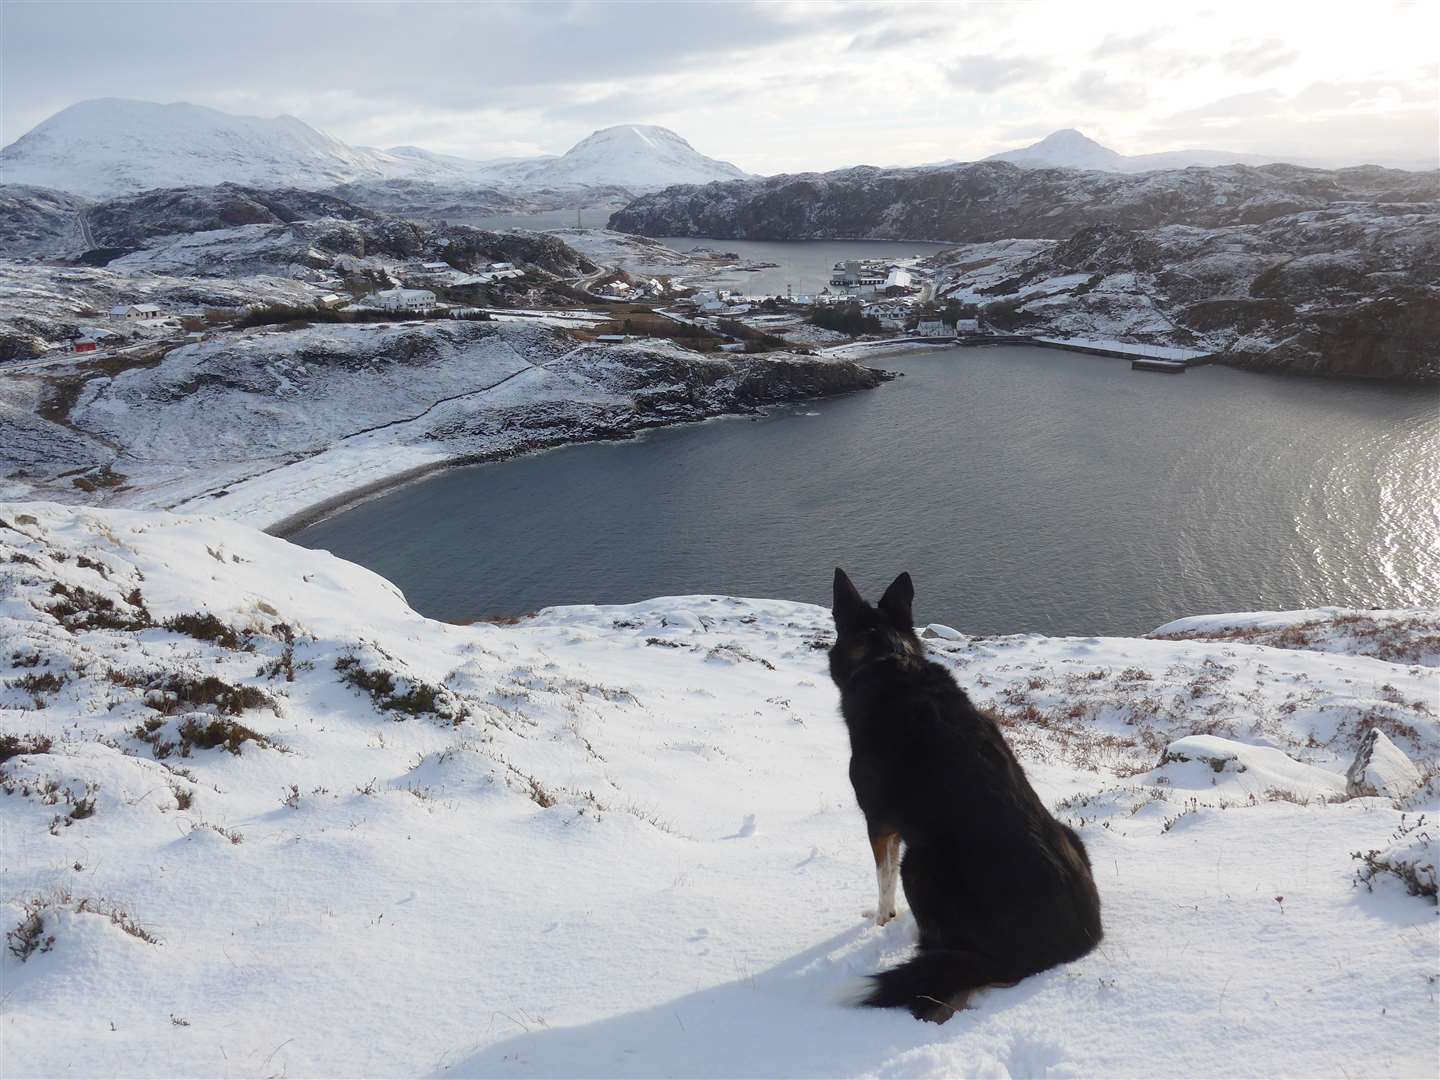 Annie the dog looks over Kinlochbervie harbour and Loch Clash, against the backdrop of mountains, Foinaven, Arkle and Stack. Photo: Murdo MacPherson